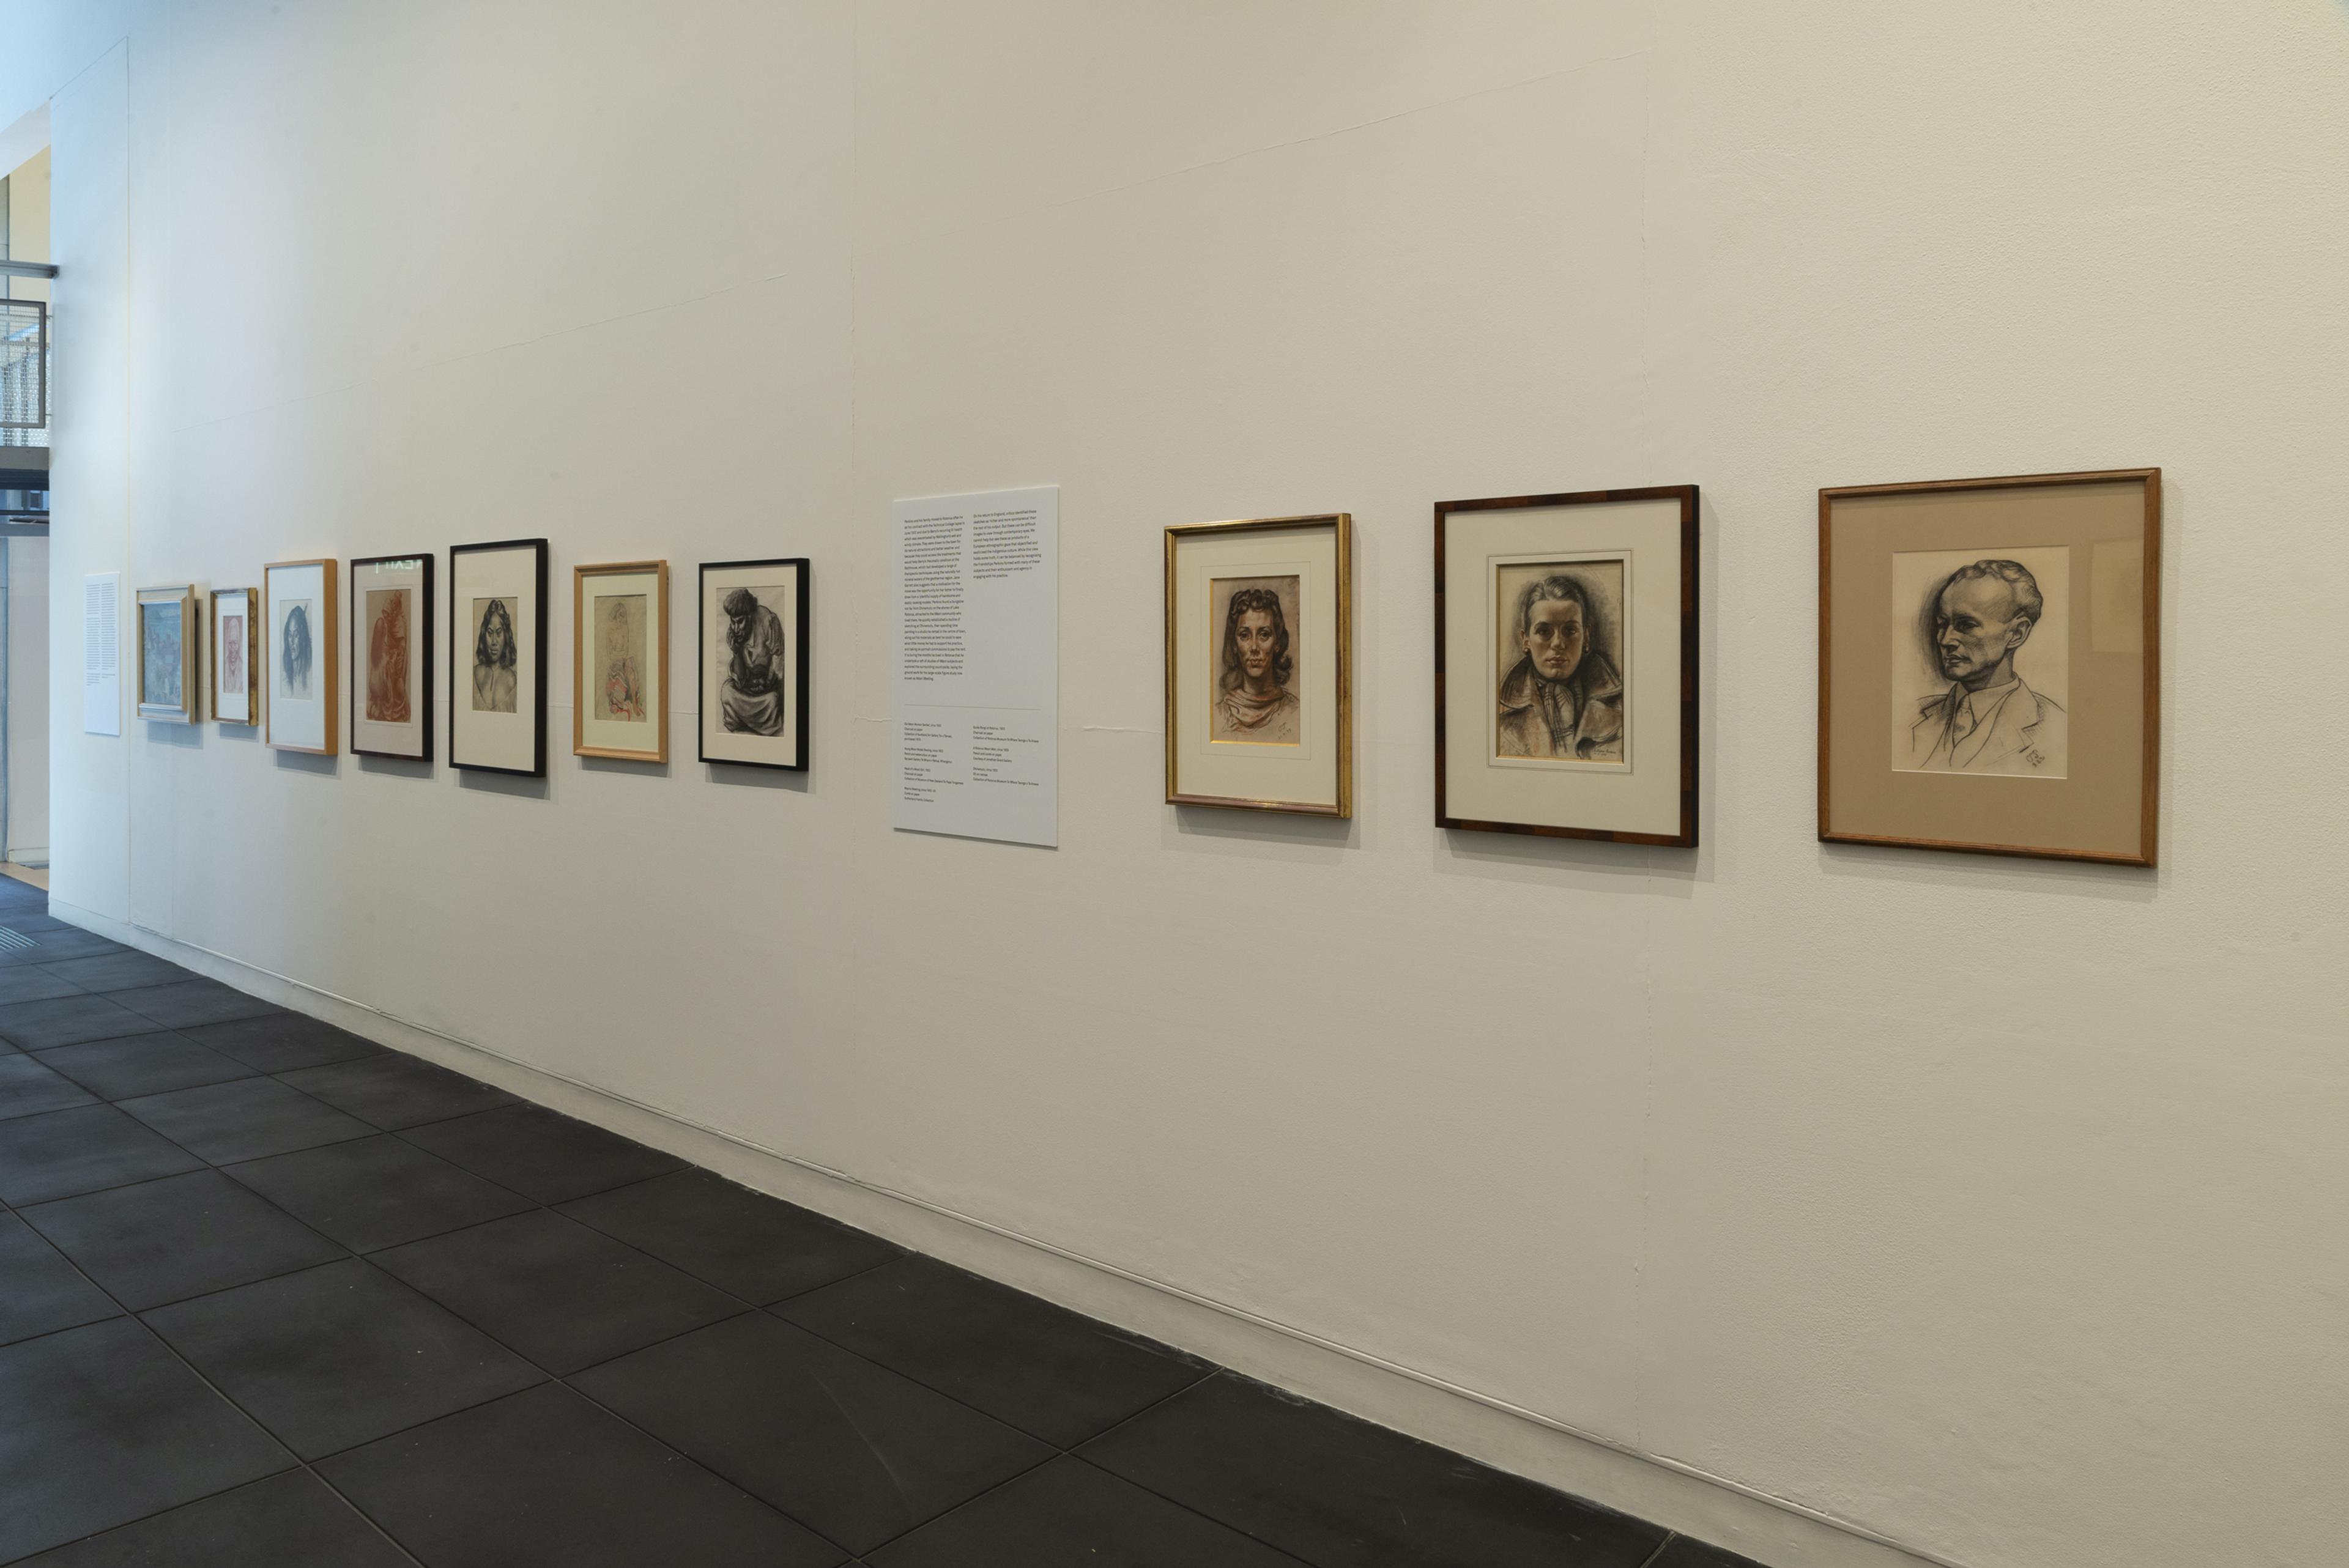 Installation view, ‘Looking for a new country’ – Christopher Perkins in New Zealand, Adam Art Gallery Te Pātaka Toi, Victoria University of Wellington, 6 November 2019 – 22 March 2020. Photo: Shaun Matthews